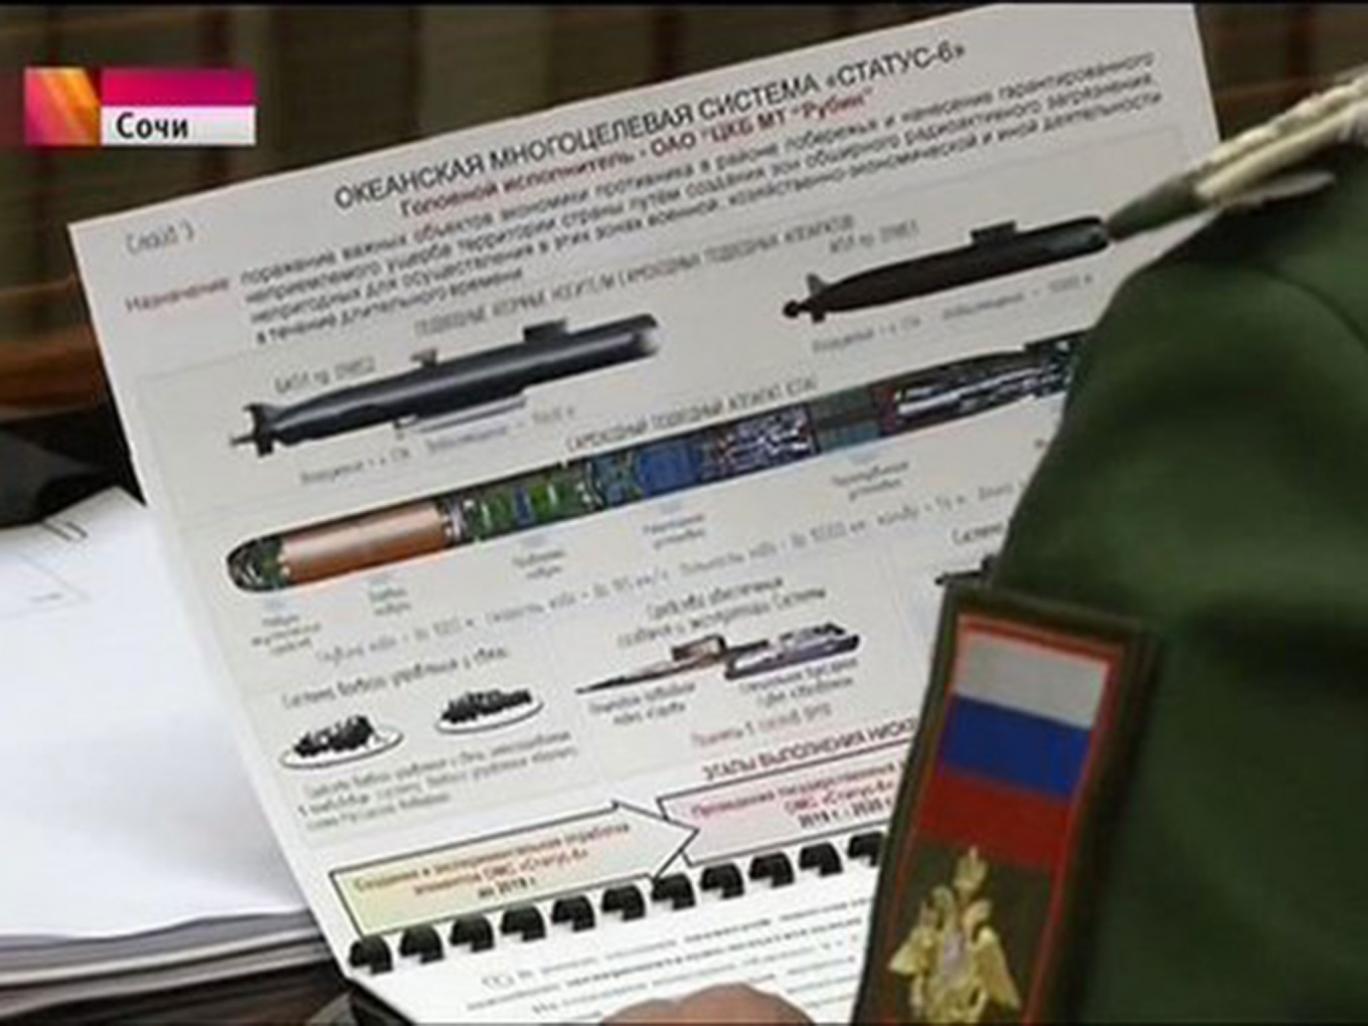 Allegedly secret plans for a 'devastating' nuclear torpedo system were shown on television Channel One Russia.